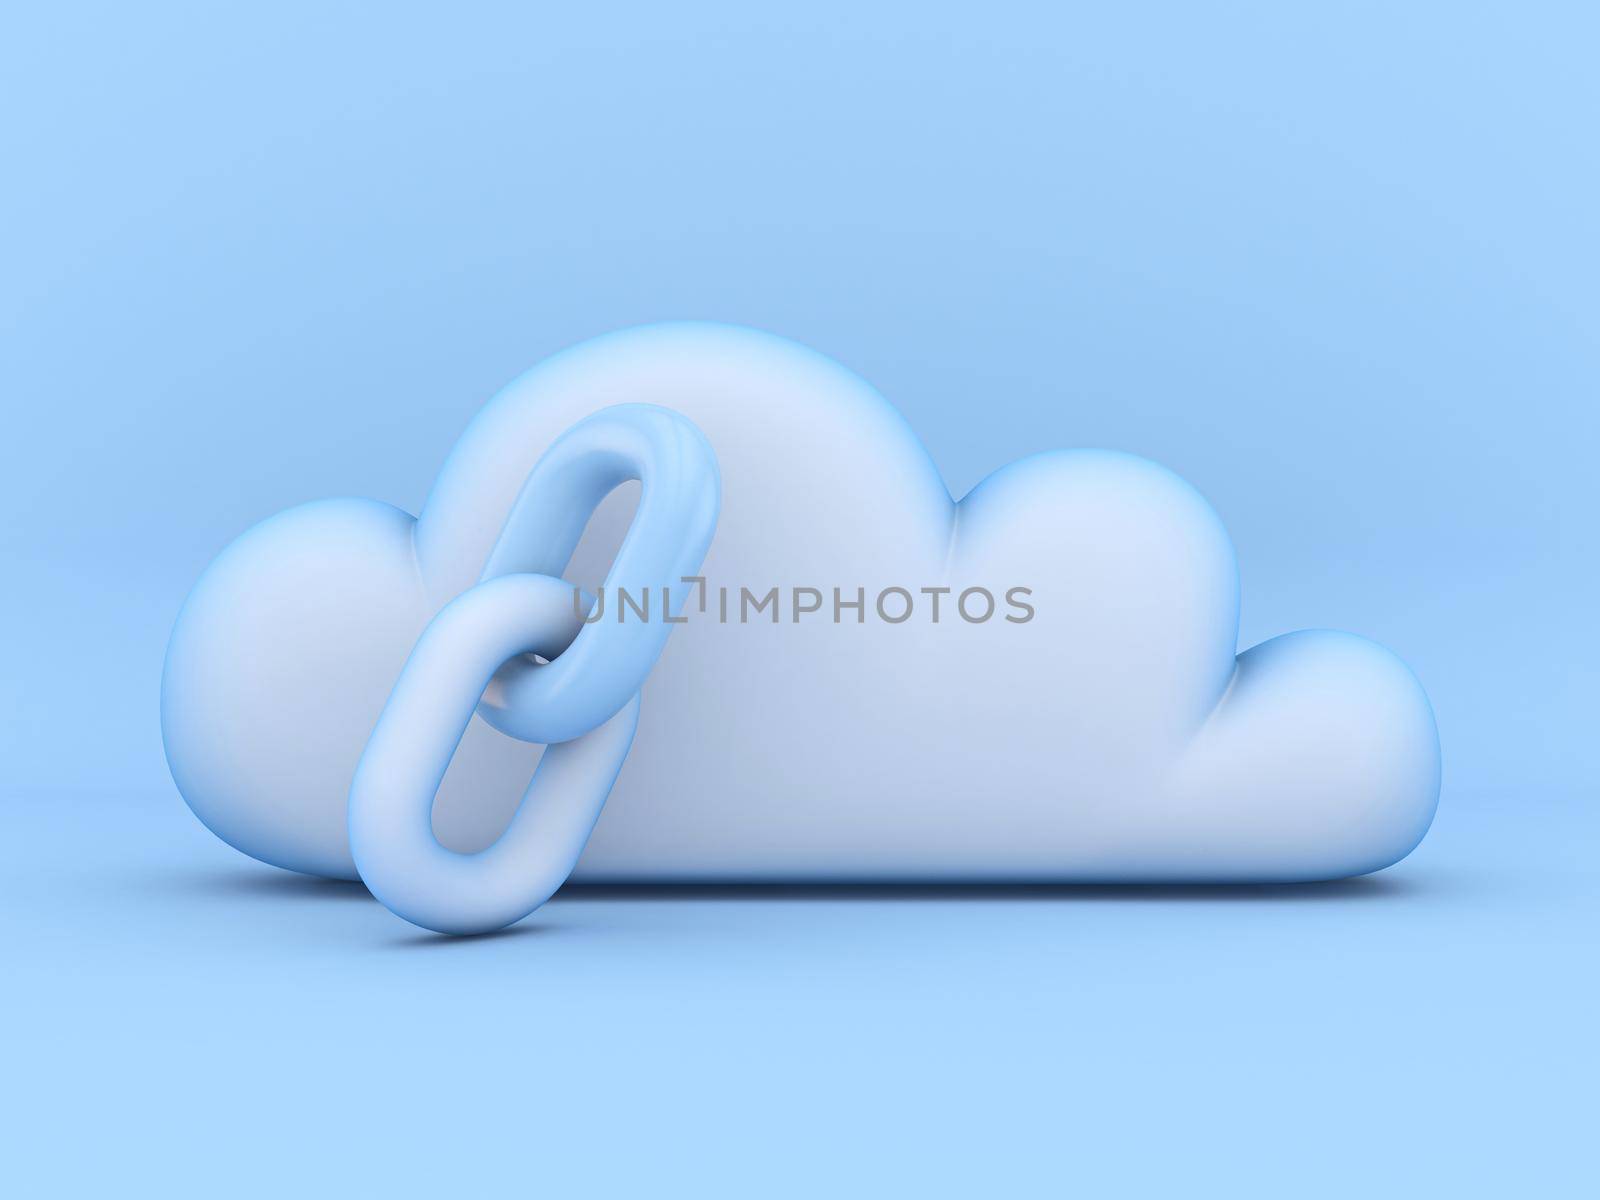 Cloud concept of internet links 3D rendering illustration isolated on blue background